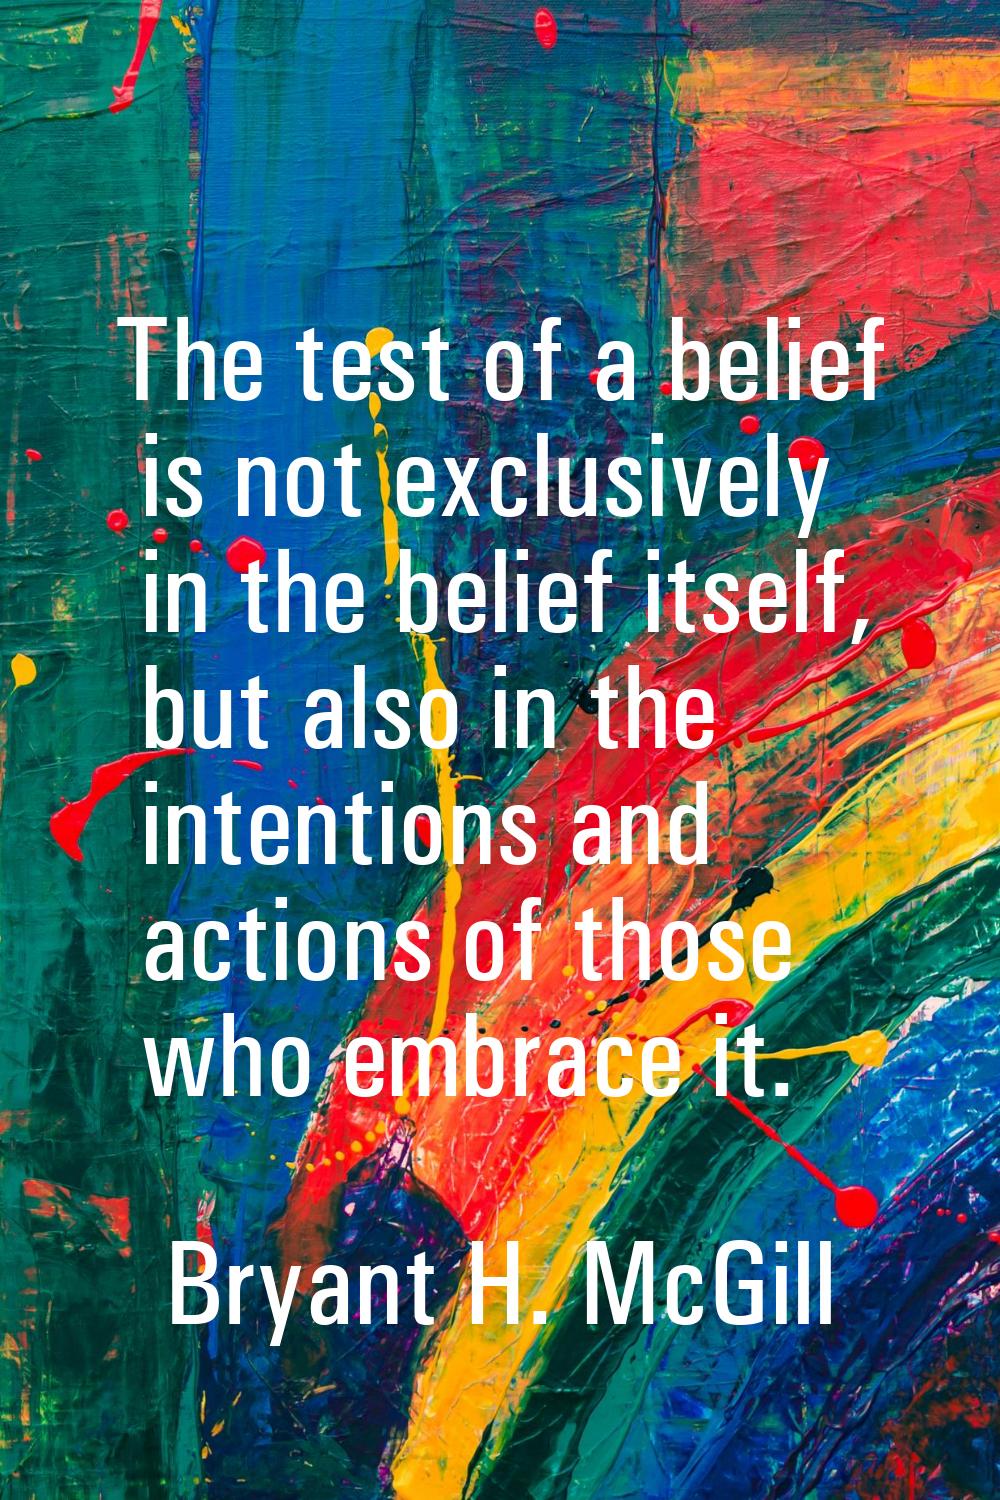 The test of a belief is not exclusively in the belief itself, but also in the intentions and action